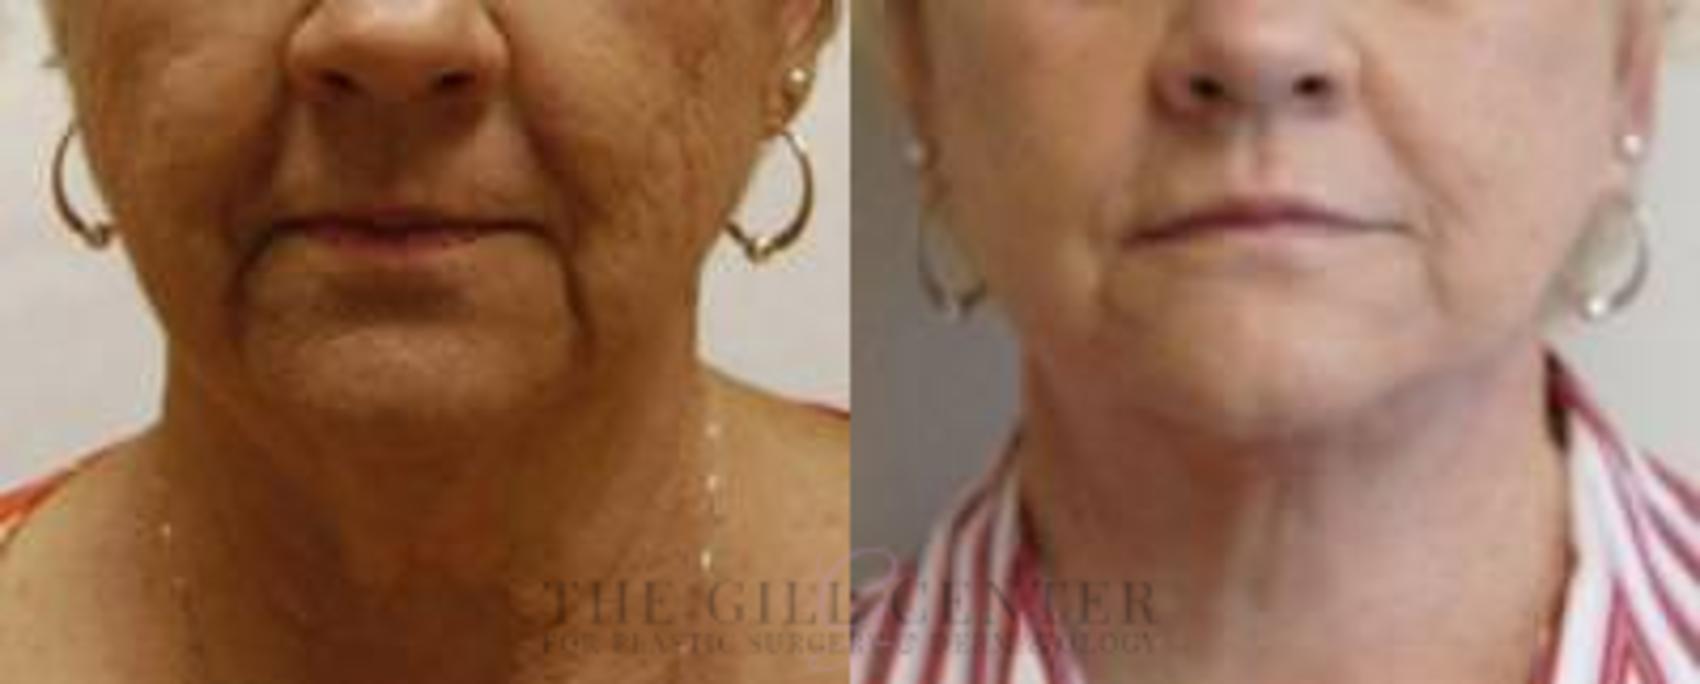 Face & Neck Lift Case 407 Before & After Front | The Woodlands, TX | The Gill Center for Plastic Surgery and Dermatology